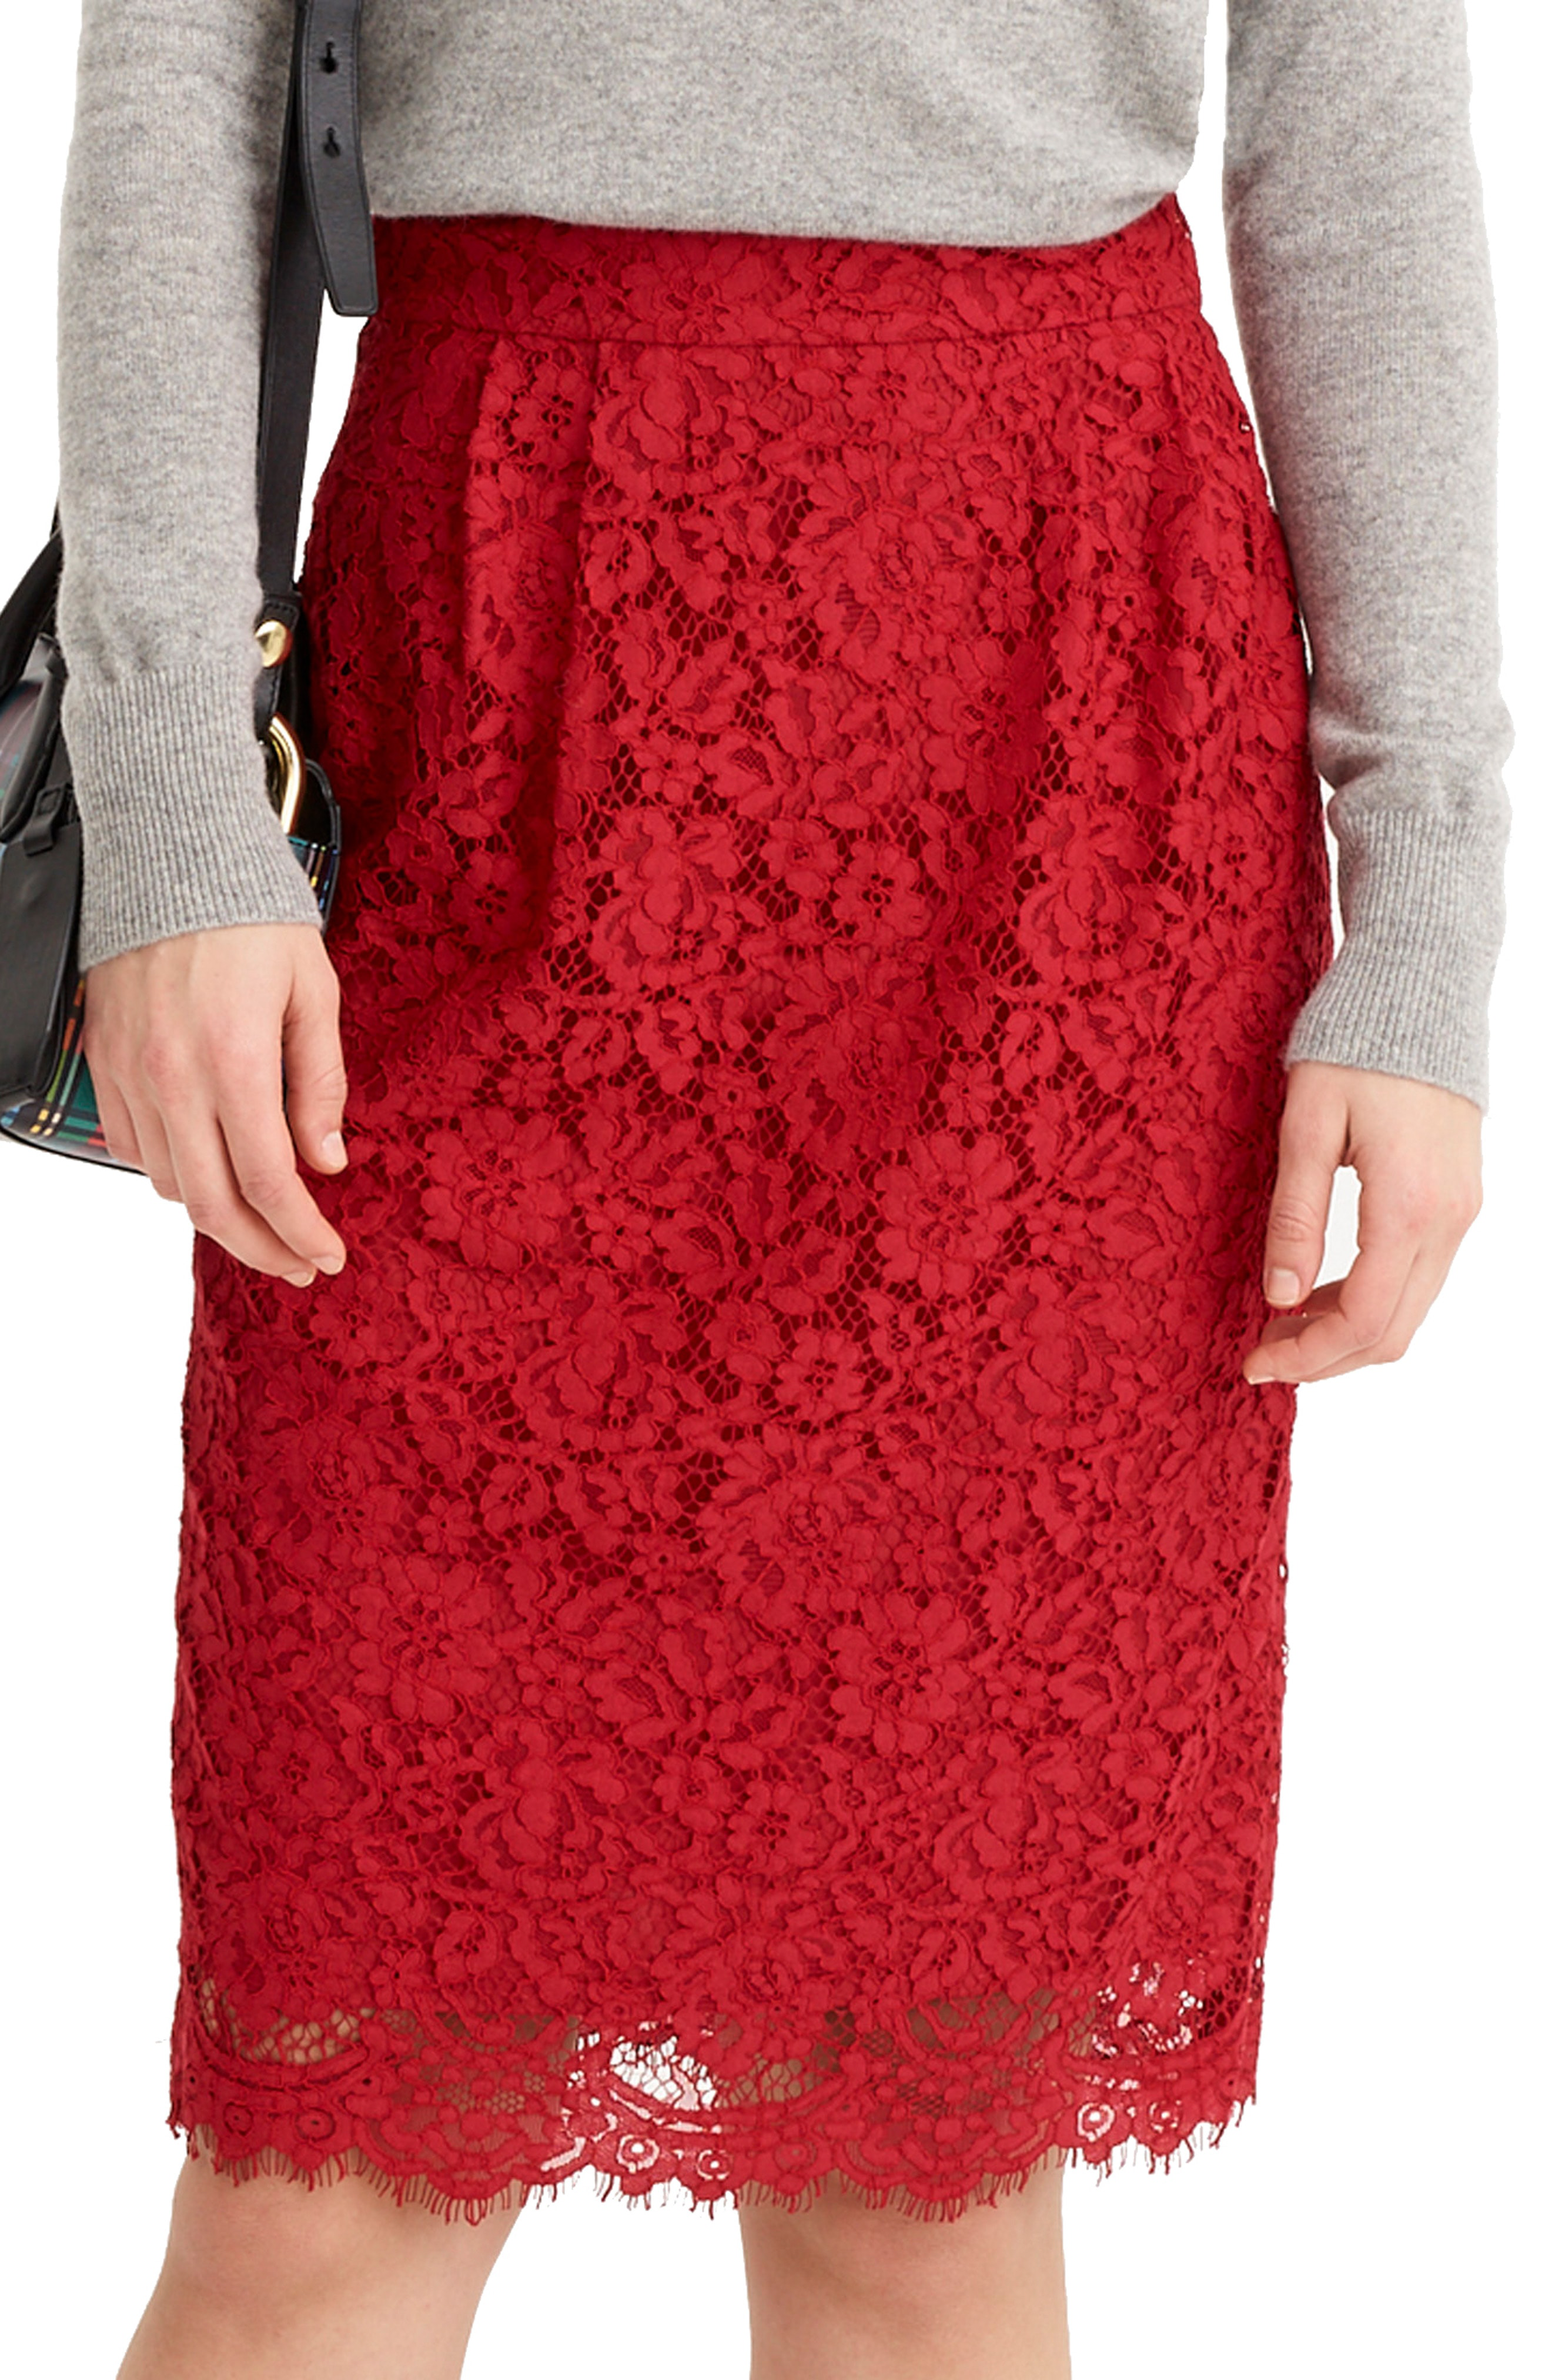 NWT AUTH J.CREW $98 Pintucked Pencil Skirt in Lace FESTIVE RED F8860 0 2 4 8 10